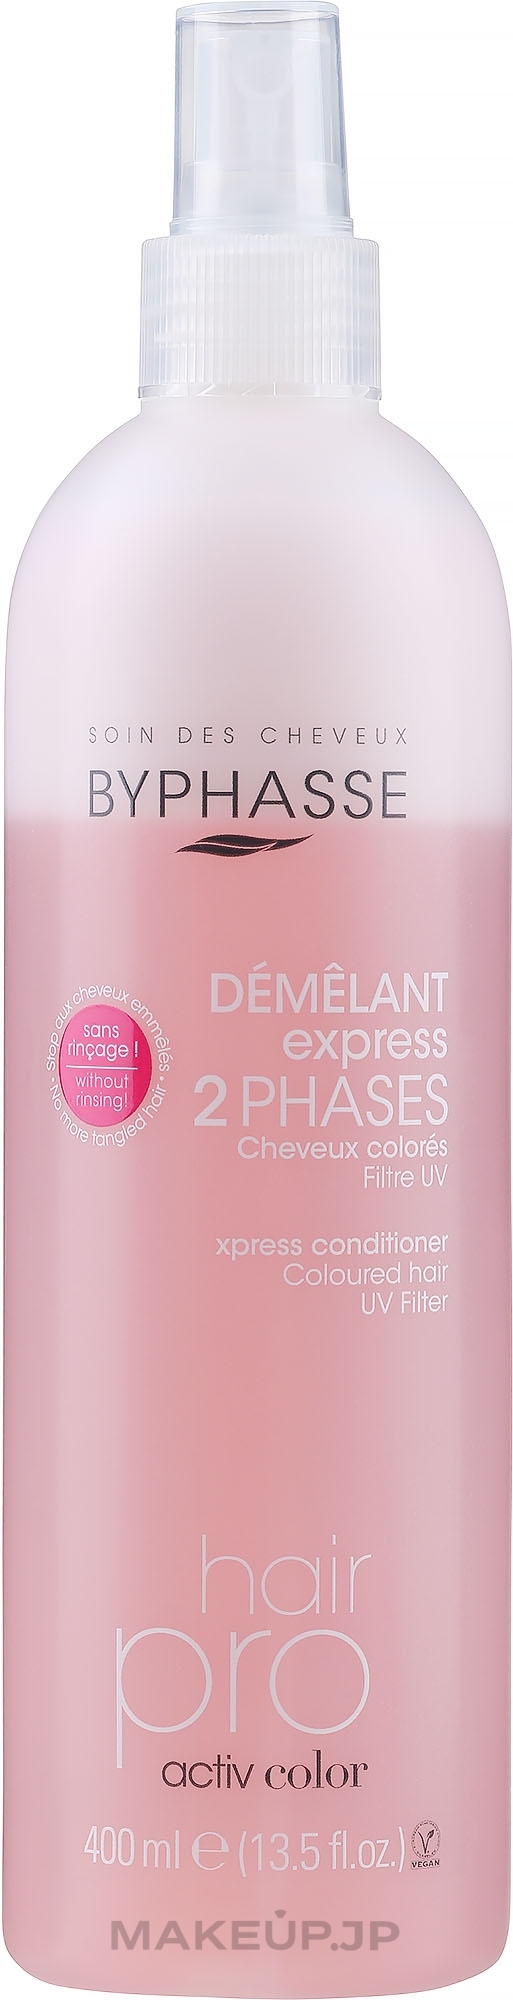 Colored Hair Spray - Byphasse Express 2 Activ Color — photo 400 ml